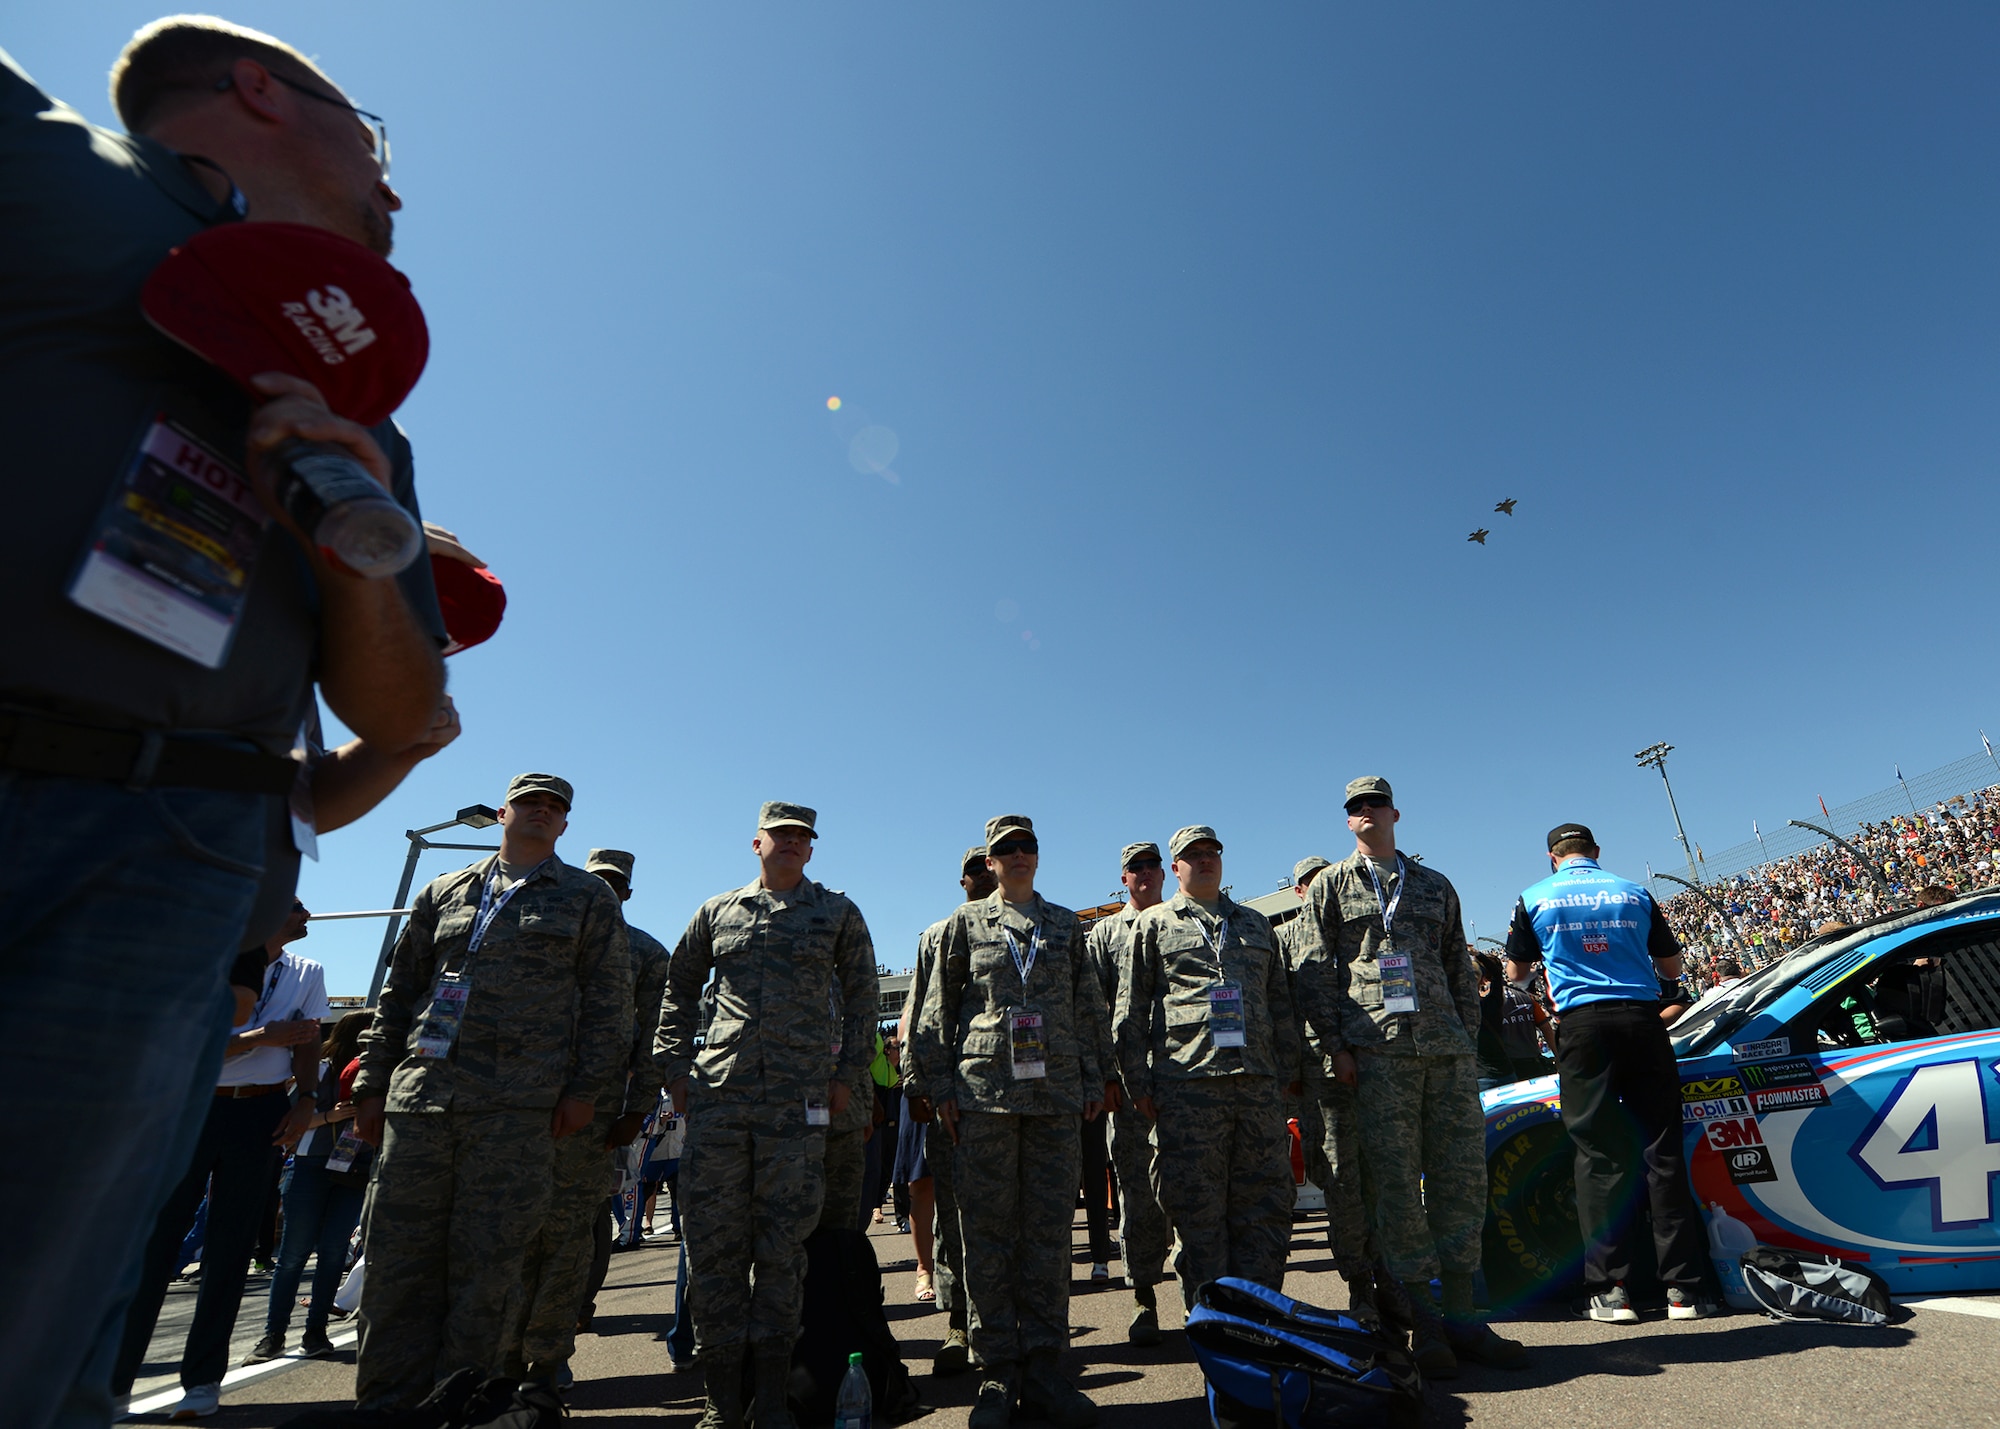 Airmen from Luke Air Force Base stand at attention while two F-35s from the 62nd Fighter Squadron perform a flyover during the opening ceremony of the Camping World 500 Mar. 19, 2017, at the Phoenix International Raceway, Avondale, Ariz. (U.S. Air Force photo by Airman First Class Alexander Cook)  